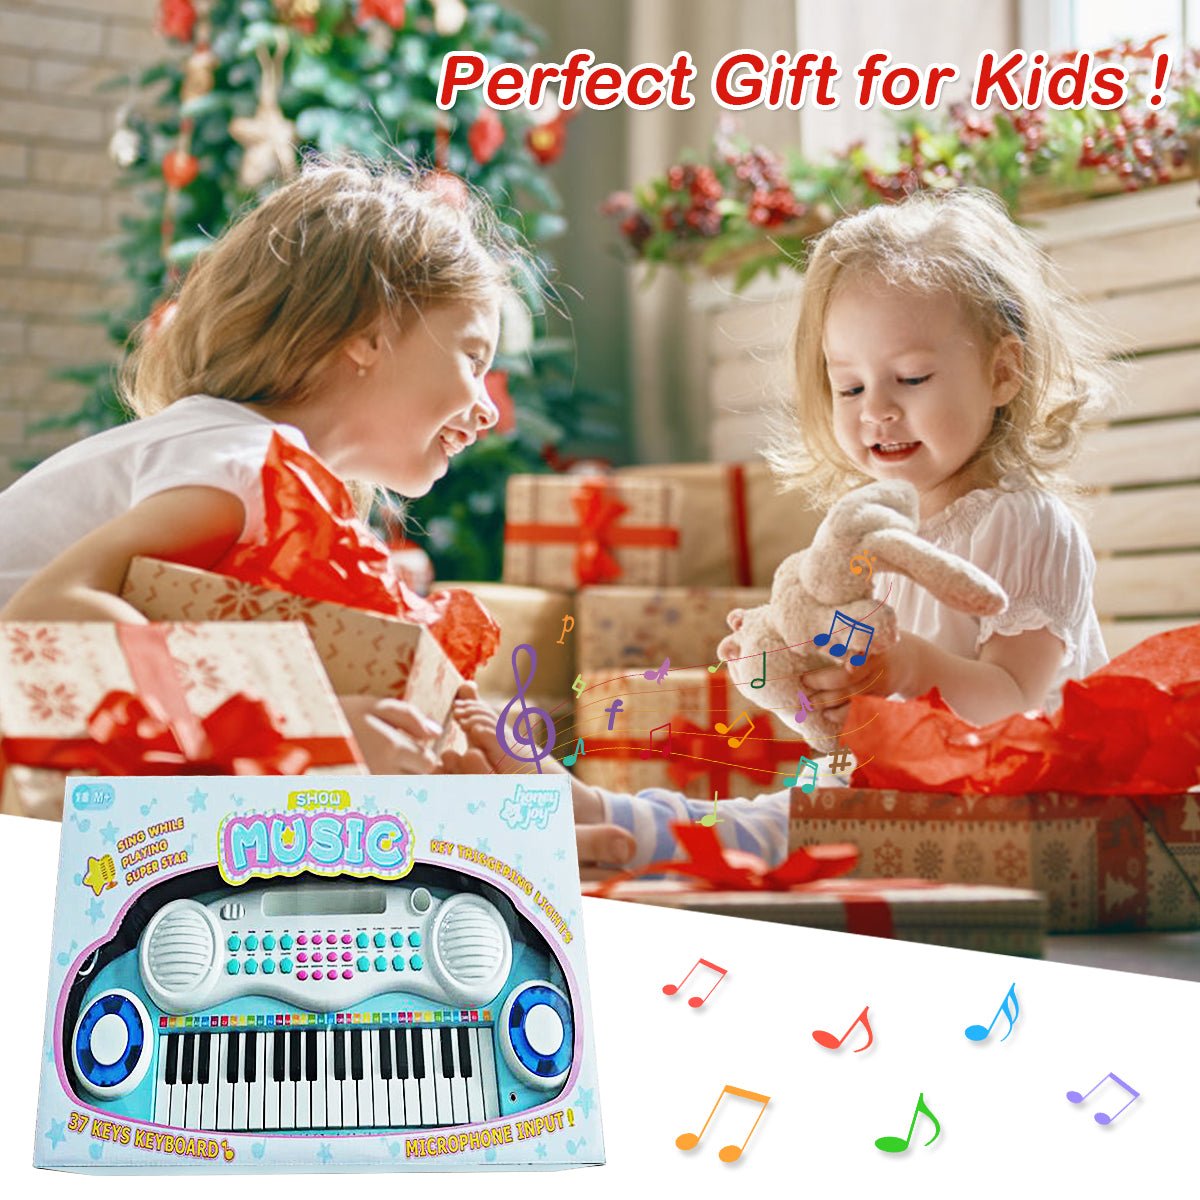 Foster Musical Creativity with the Blue Keyboard Piano for Kids